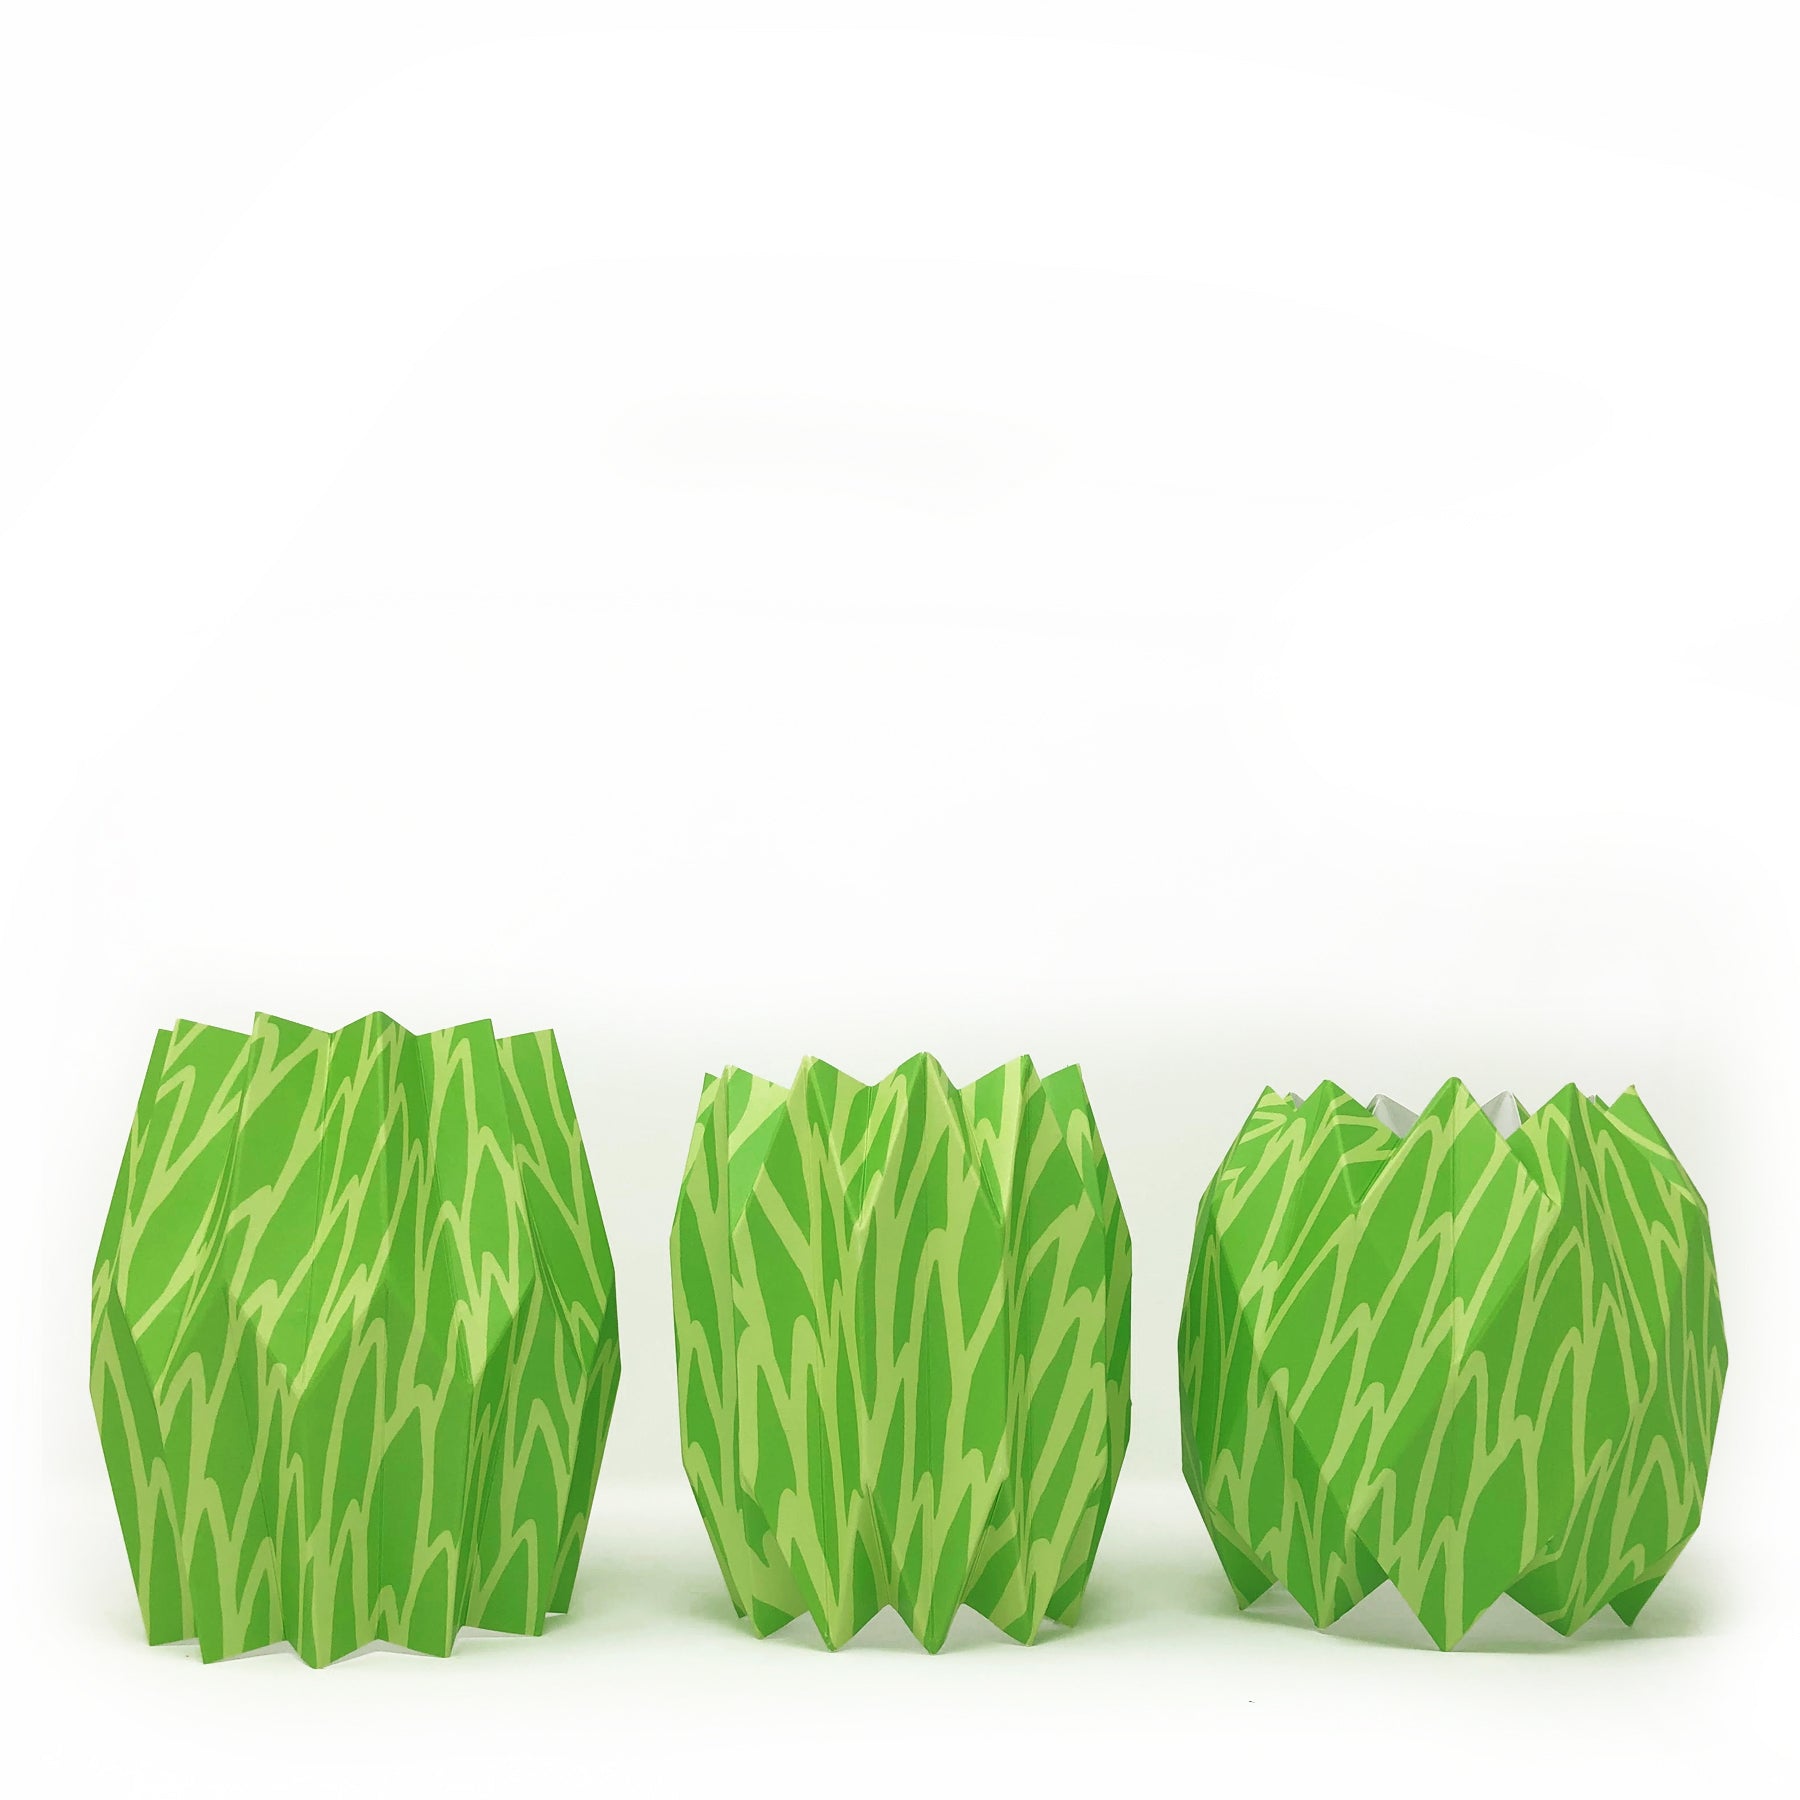 Bright green paper vase sleeve centerpieces